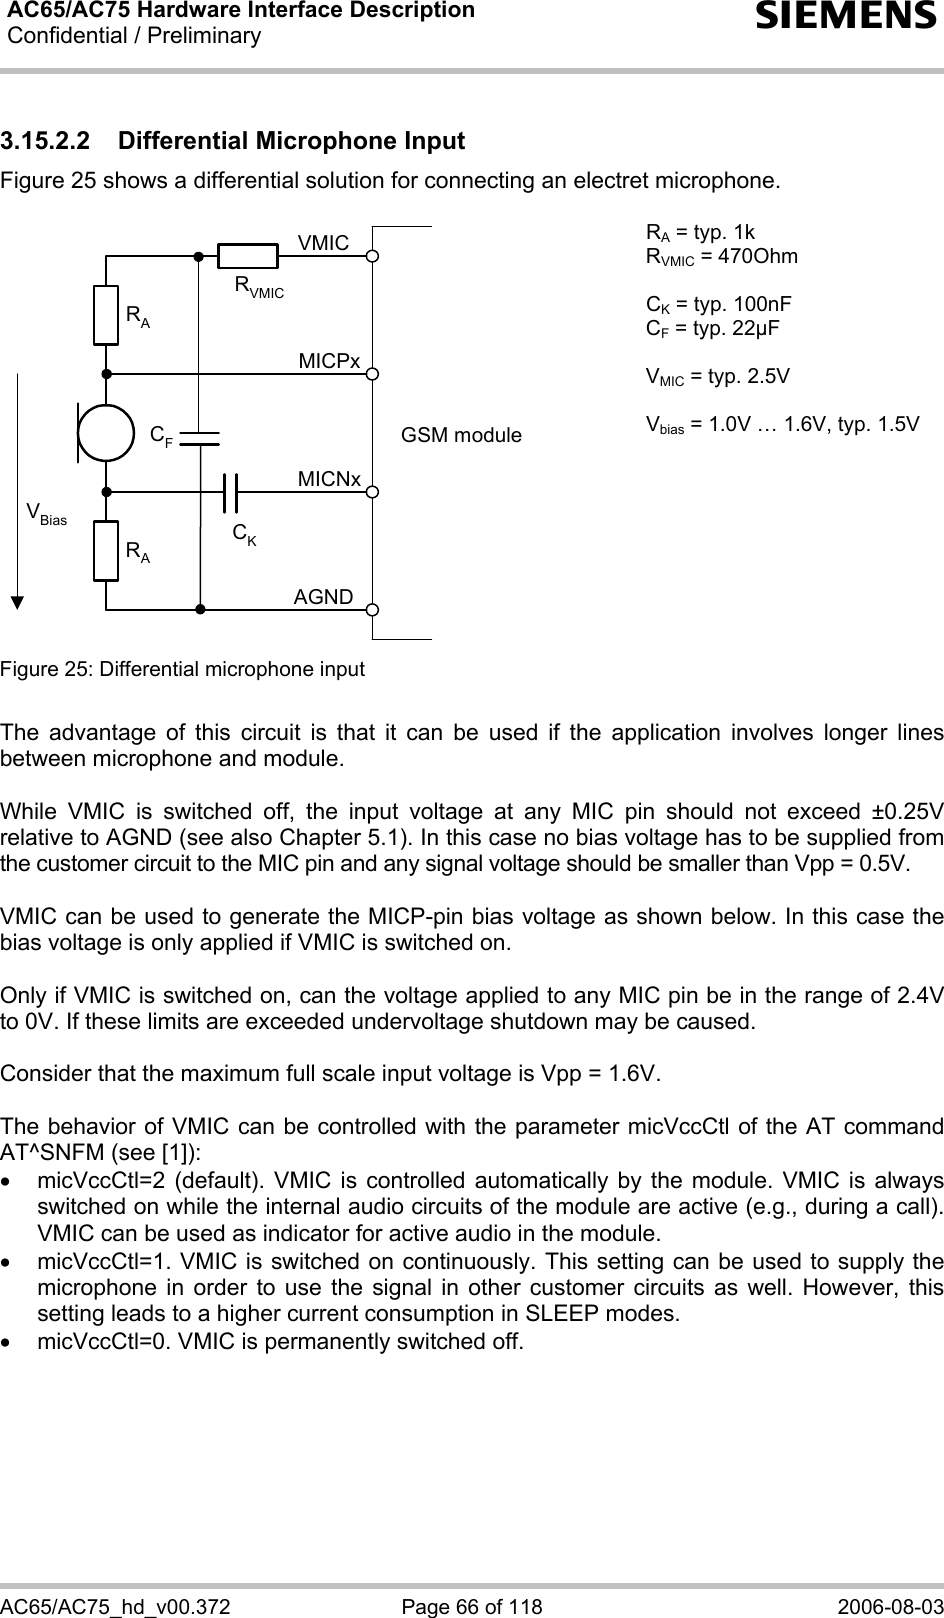 AC65/AC75 Hardware Interface Description Confidential / Preliminary   s AC65/AC75_hd_v00.372  Page 66 of 118  2006-08-03 3.15.2.2  Differential Microphone Input Figure 25 shows a differential solution for connecting an electret microphone.   GSM moduleRARAVBias CKAGNDMICNxMICPxVMICCFRVMIC RA = typ. 1k RVMIC = 470Ohm  CK = typ. 100nF CF = typ. 22µF  VMIC = typ. 2.5V  Vbias = 1.0V … 1.6V, typ. 1.5V Figure 25: Differential microphone input    The advantage of this circuit is that it can be used if the application involves longer lines between microphone and module.  While VMIC is switched off, the input voltage at any MIC pin should not exceed ±0.25V relative to AGND (see also Chapter 5.1). In this case no bias voltage has to be supplied from the customer circuit to the MIC pin and any signal voltage should be smaller than Vpp = 0.5V.  VMIC can be used to generate the MICP-pin bias voltage as shown below. In this case the bias voltage is only applied if VMIC is switched on.  Only if VMIC is switched on, can the voltage applied to any MIC pin be in the range of 2.4V to 0V. If these limits are exceeded undervoltage shutdown may be caused.  Consider that the maximum full scale input voltage is Vpp = 1.6V.  The behavior of VMIC can be controlled with the parameter micVccCtl of the AT command AT^SNFM (see [1]): •  micVccCtl=2 (default). VMIC is controlled automatically by the module. VMIC is always switched on while the internal audio circuits of the module are active (e.g., during a call). VMIC can be used as indicator for active audio in the module. •  micVccCtl=1. VMIC is switched on continuously. This setting can be used to supply the microphone in order to use the signal in other customer circuits as well. However, this setting leads to a higher current consumption in SLEEP modes. •  micVccCtl=0. VMIC is permanently switched off.  